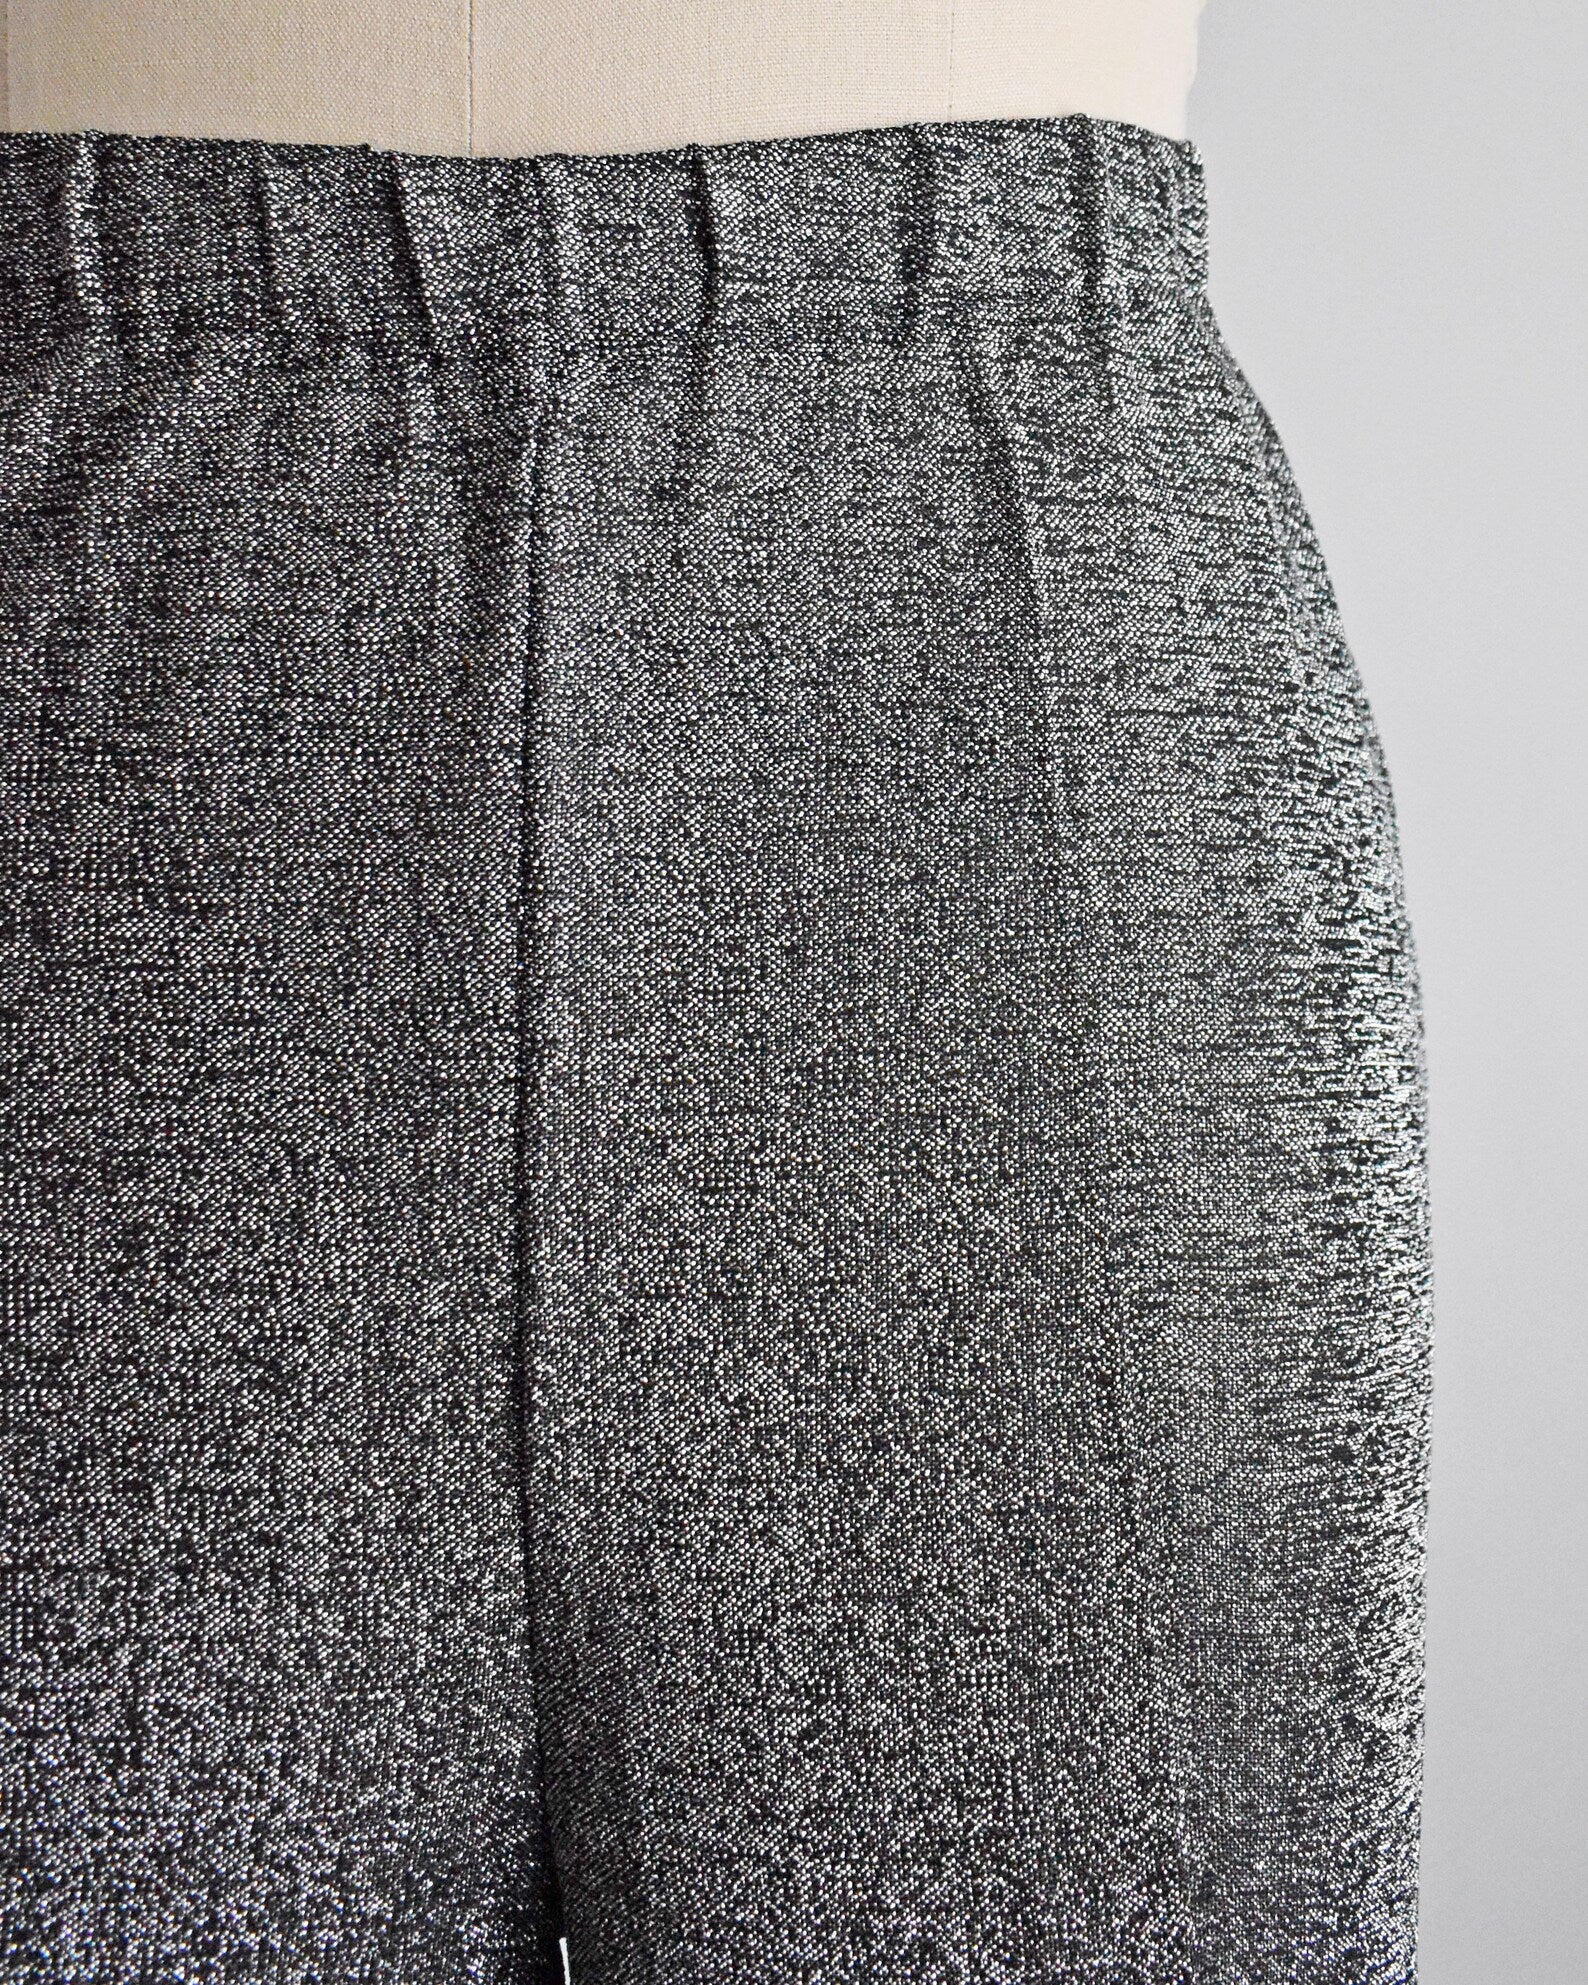 Close up of the waist and hips of a vintage pair of 70s silver and black metallic pants on a dress form.